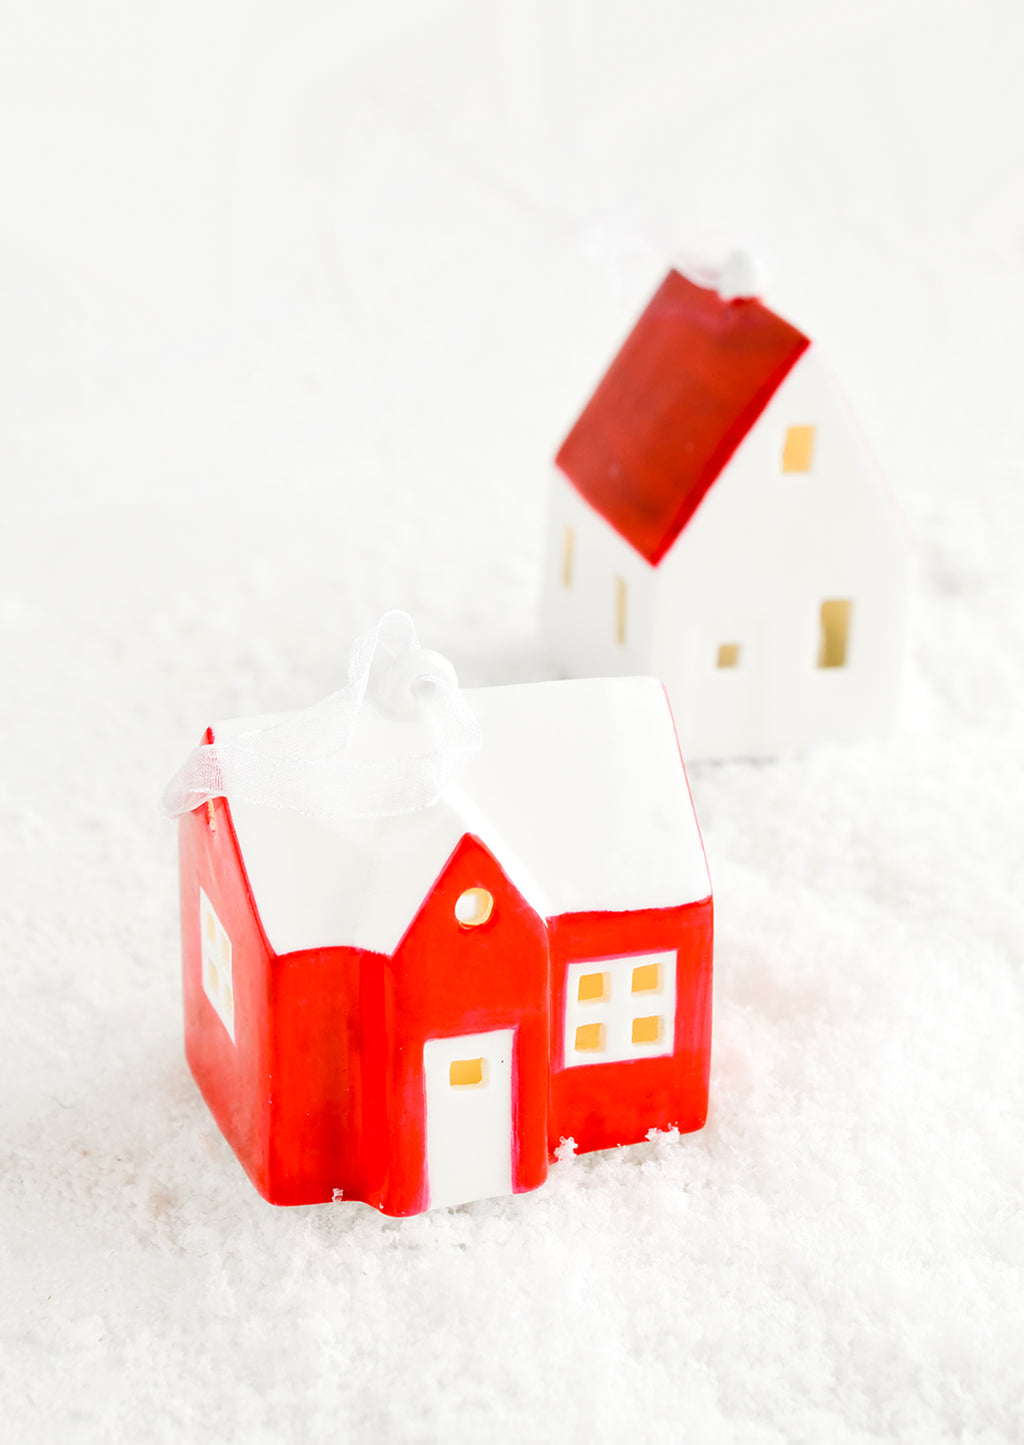 1: A ceramic christmas ornament in the shape of a farmhouse painted in red and white with interior lights.